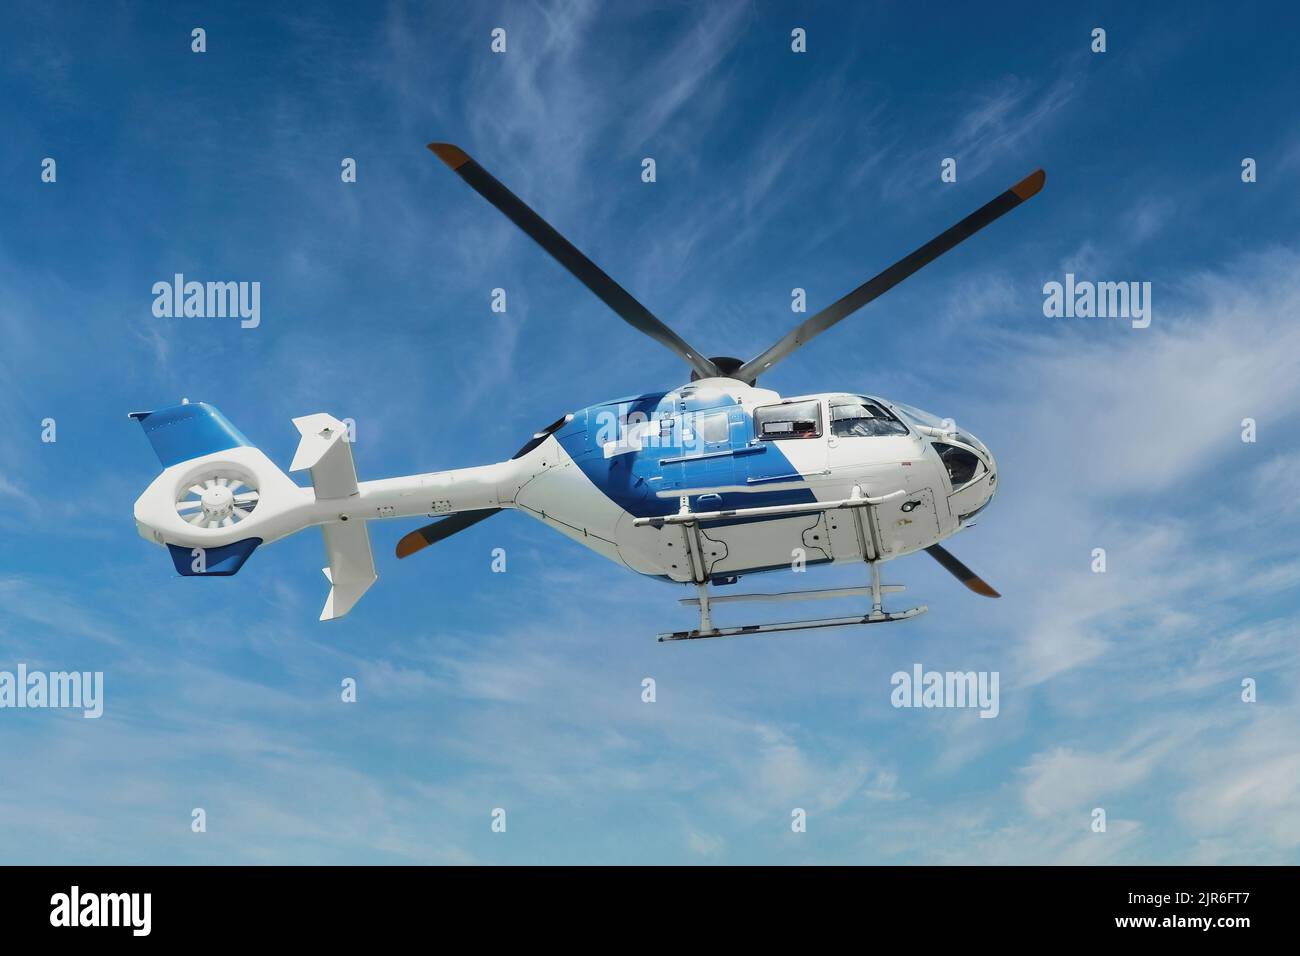 Blue and white air ambulance rescue helicopter flying mid-air against a blue sky background Stock Photo